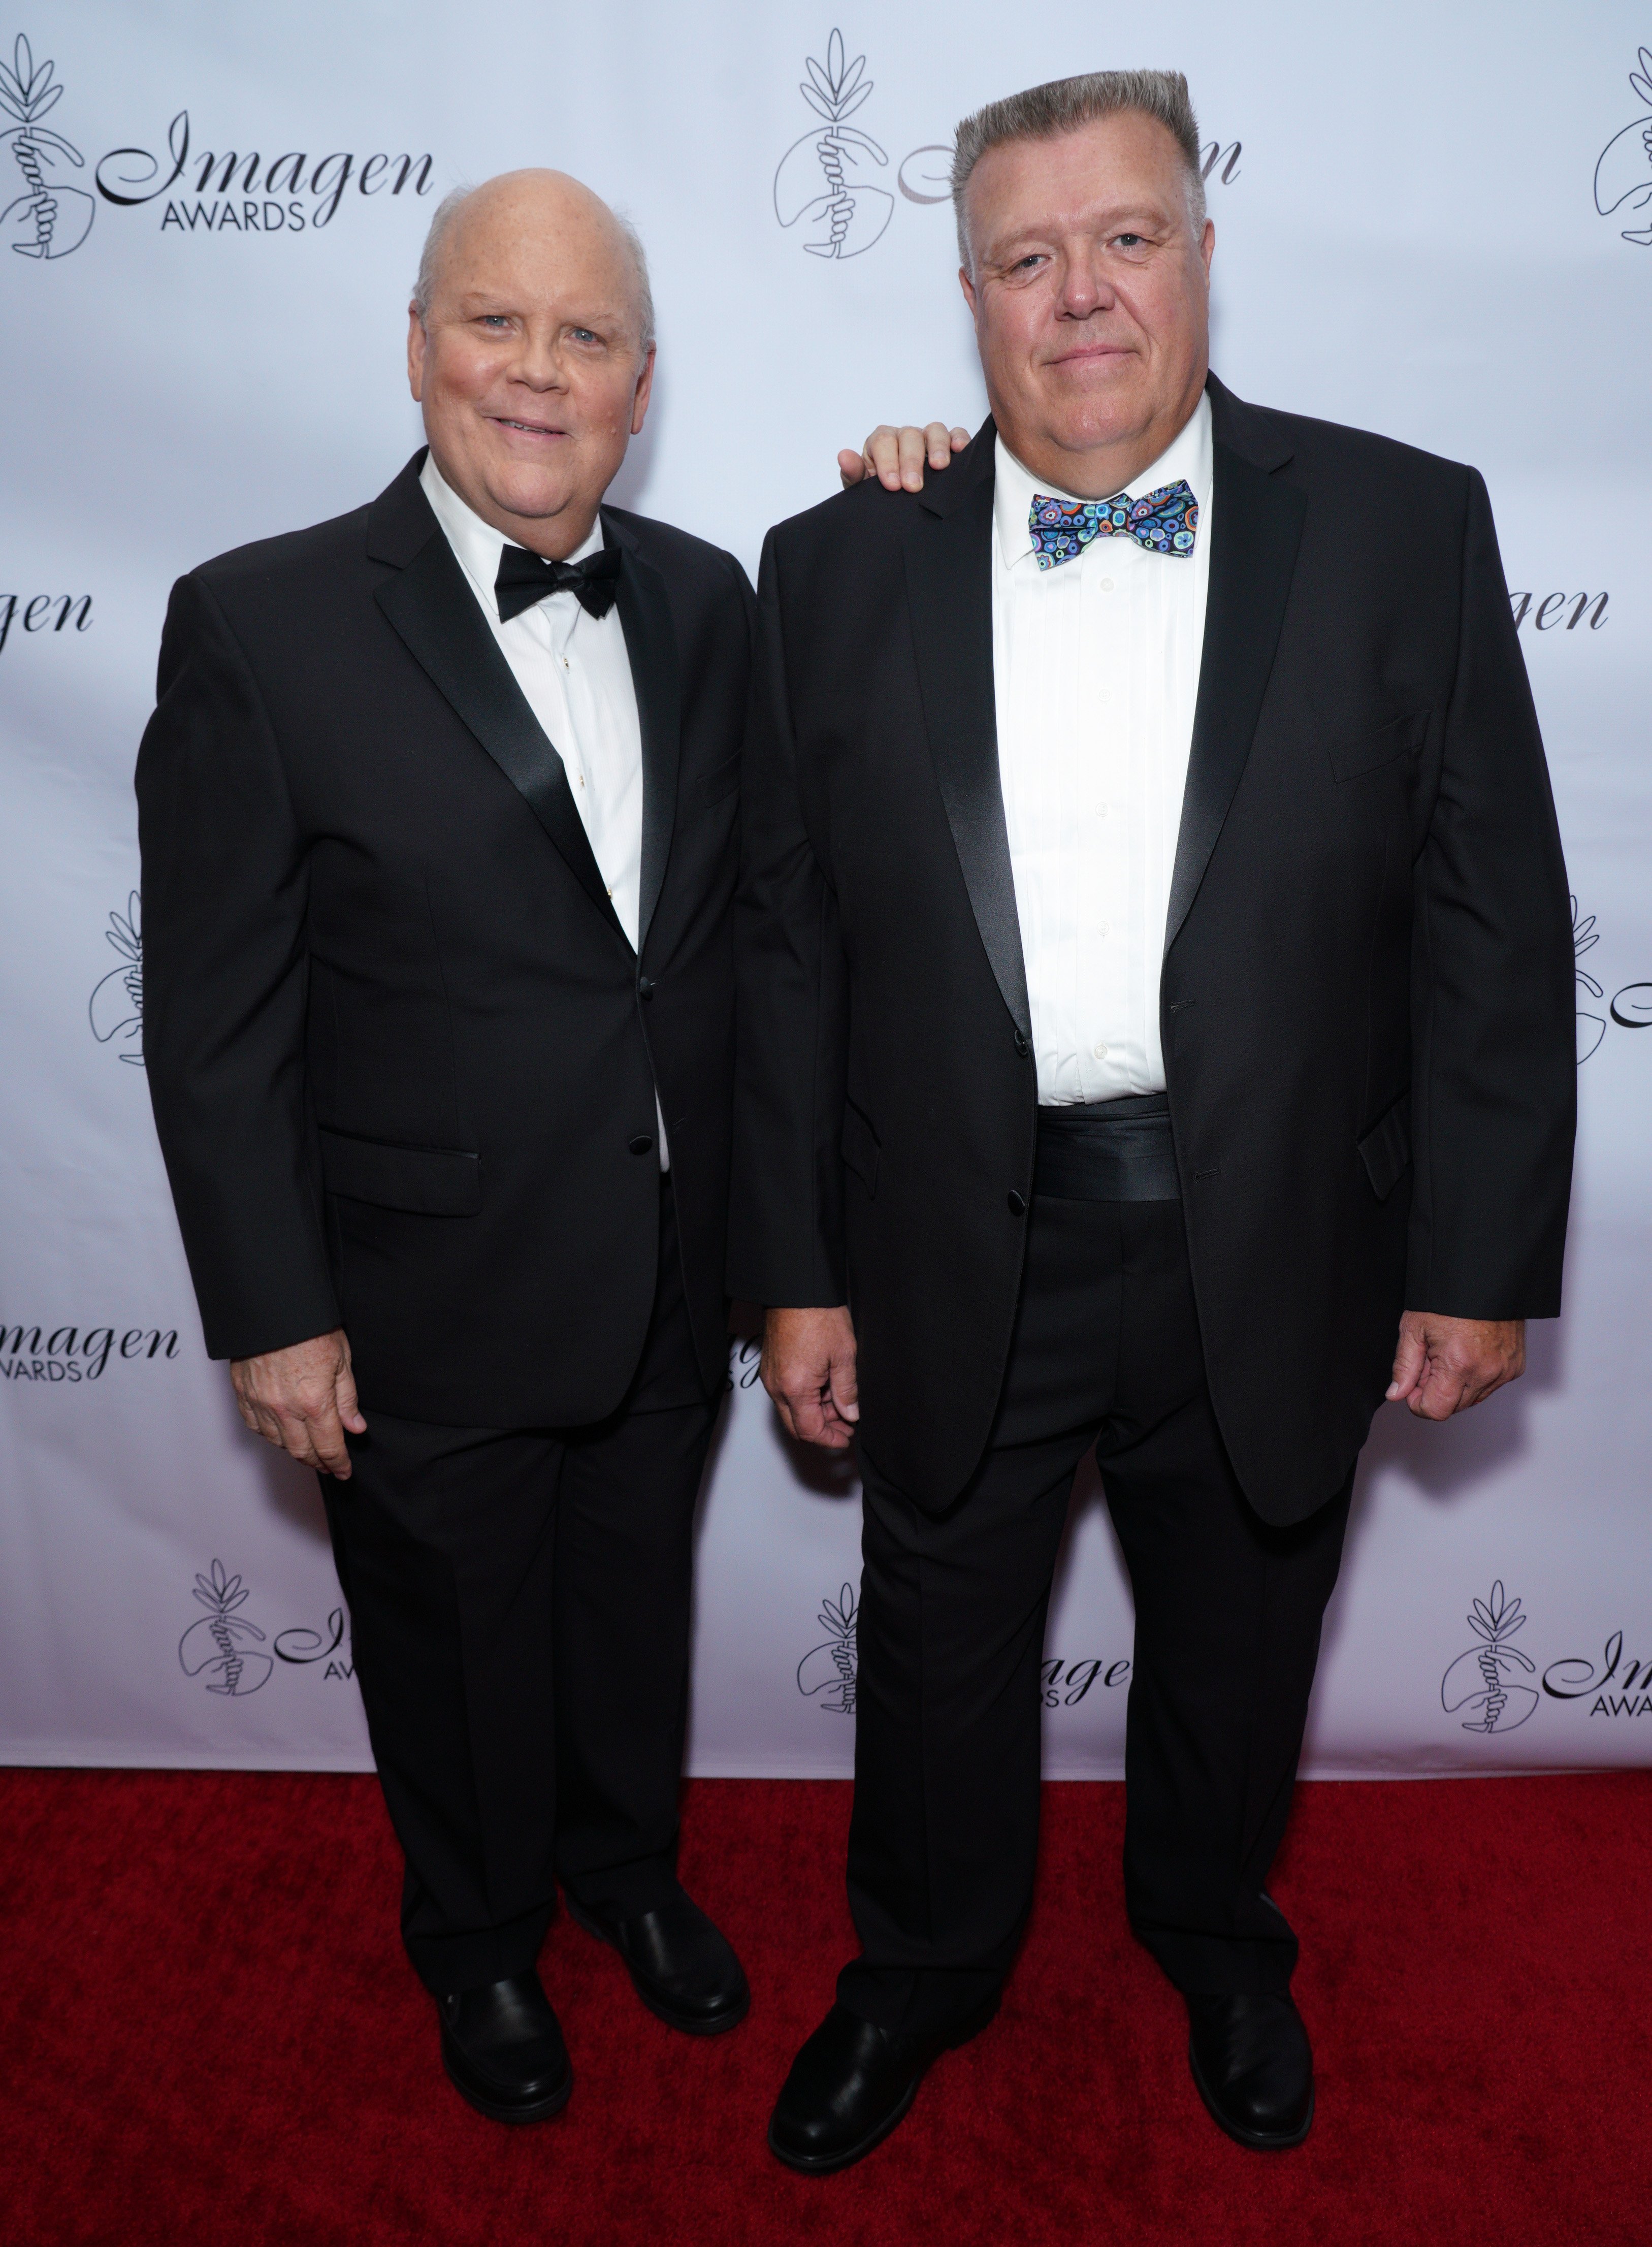 Dirk Blocker and Joel McKinnon Miller attend the 34th Annual Imagen Awards | Source: Getty Images